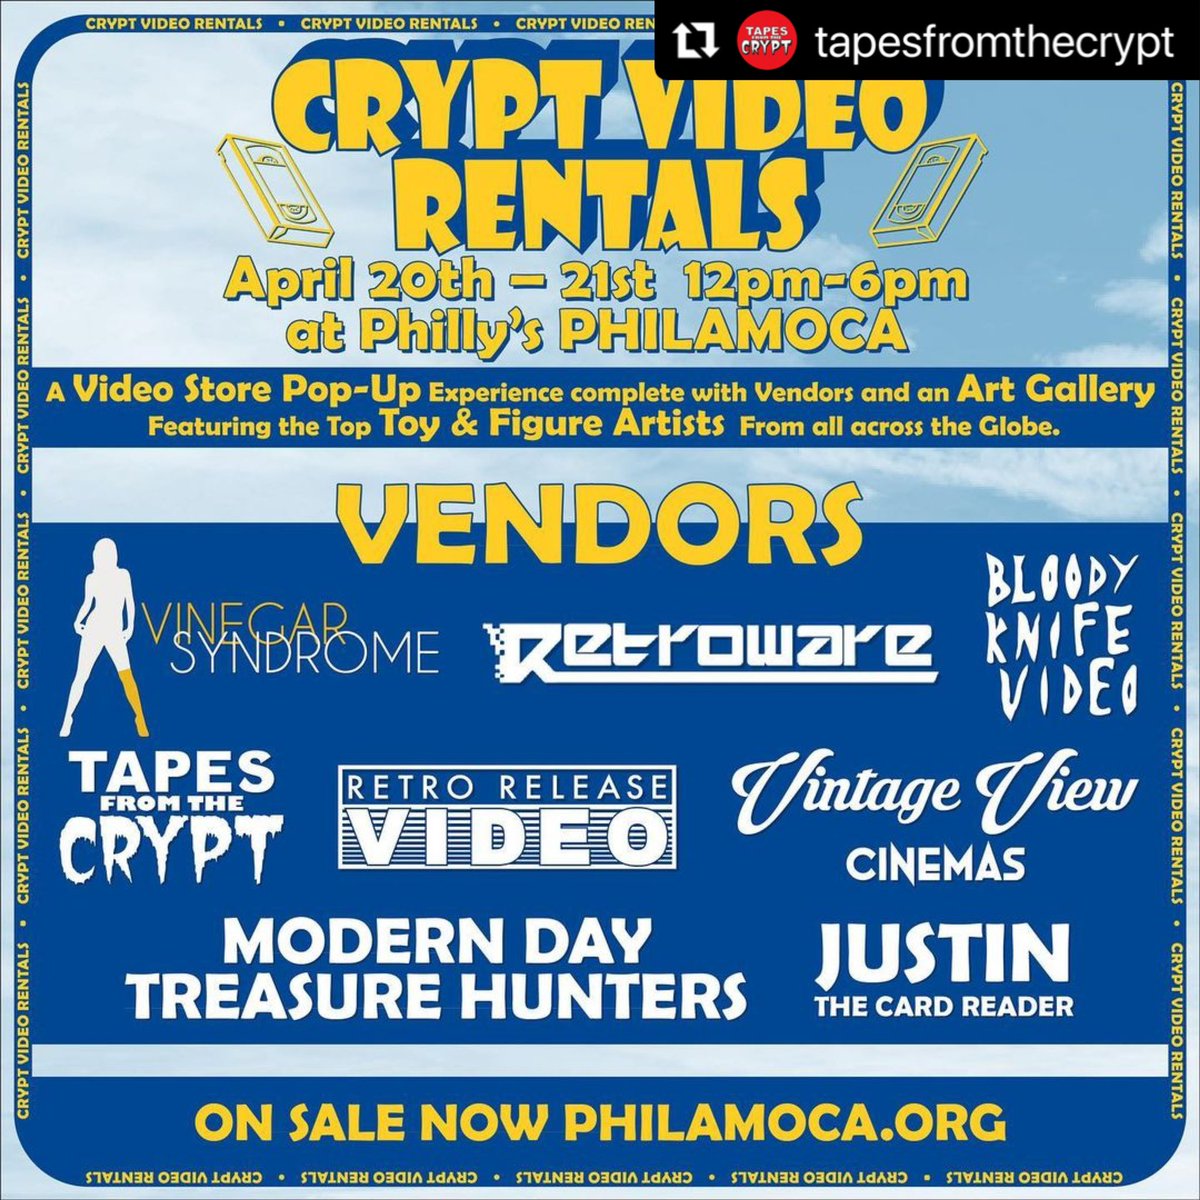 APRIL 20th & 21st come hang for @cryptvideorentals at the @PhilaMOCA! The gang is having a special screening of HEAVYWEIGHTS, followed by a live Q&A with Shaun Weiss hosted by the Dumpster boys & @HacktheMovies! Don’t miss this one, Dumpster Dwellers! Grab your tix now! 💚📼🥪